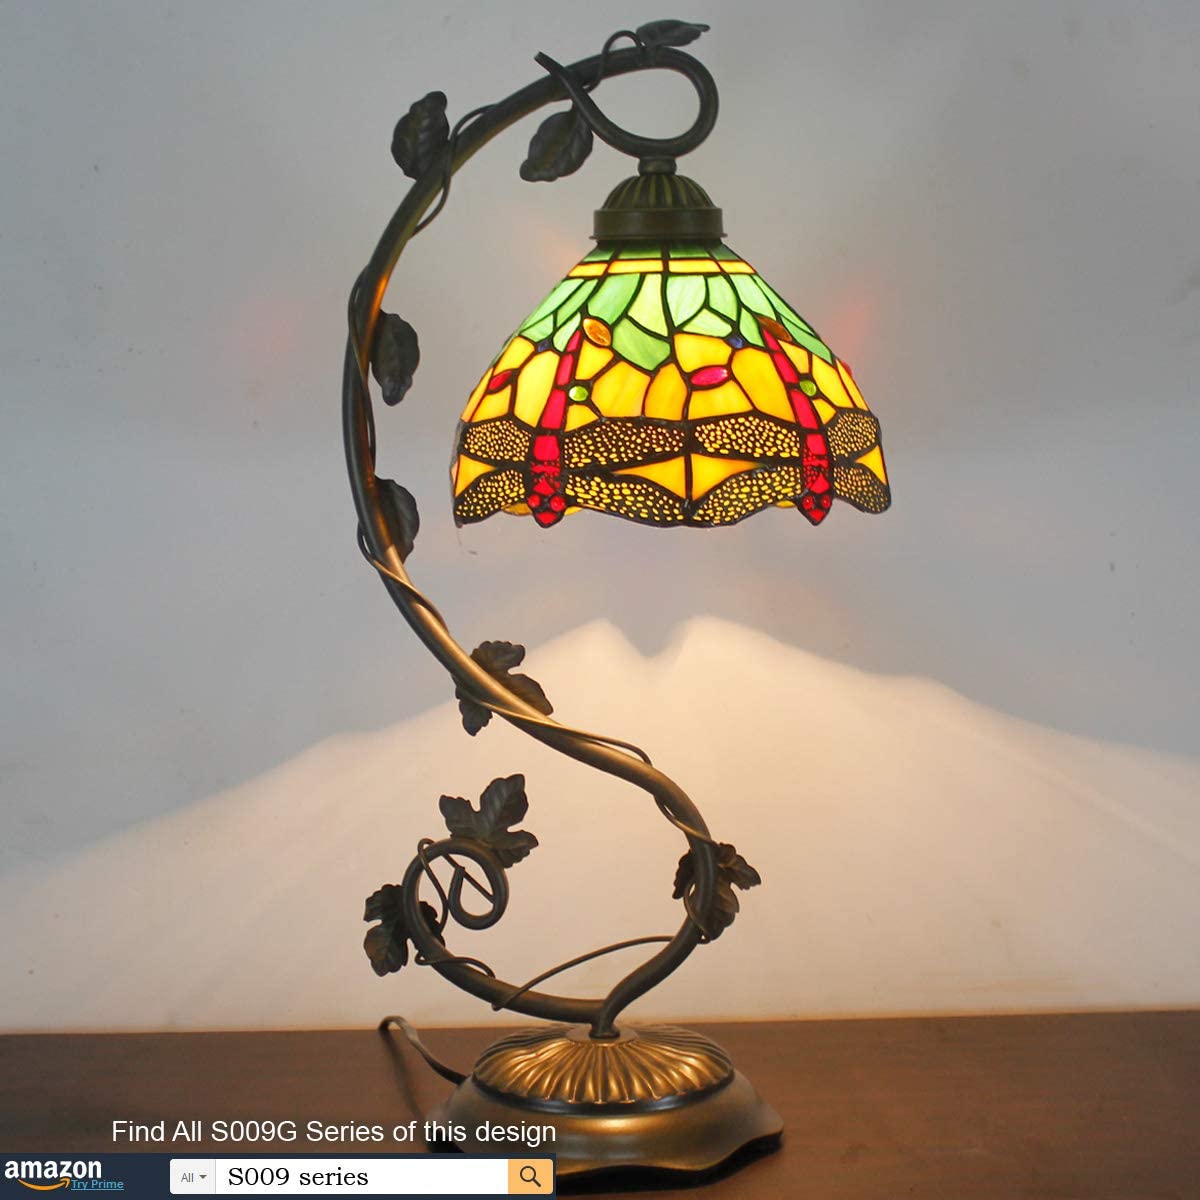 SHADY  Lamp Green Yellow Stained Glass Dragonfly Style Table Lamp Metal Leaf Base 8X10X21 Inches Desk Light Decor Small Space Bedroom Home Office S009G Series